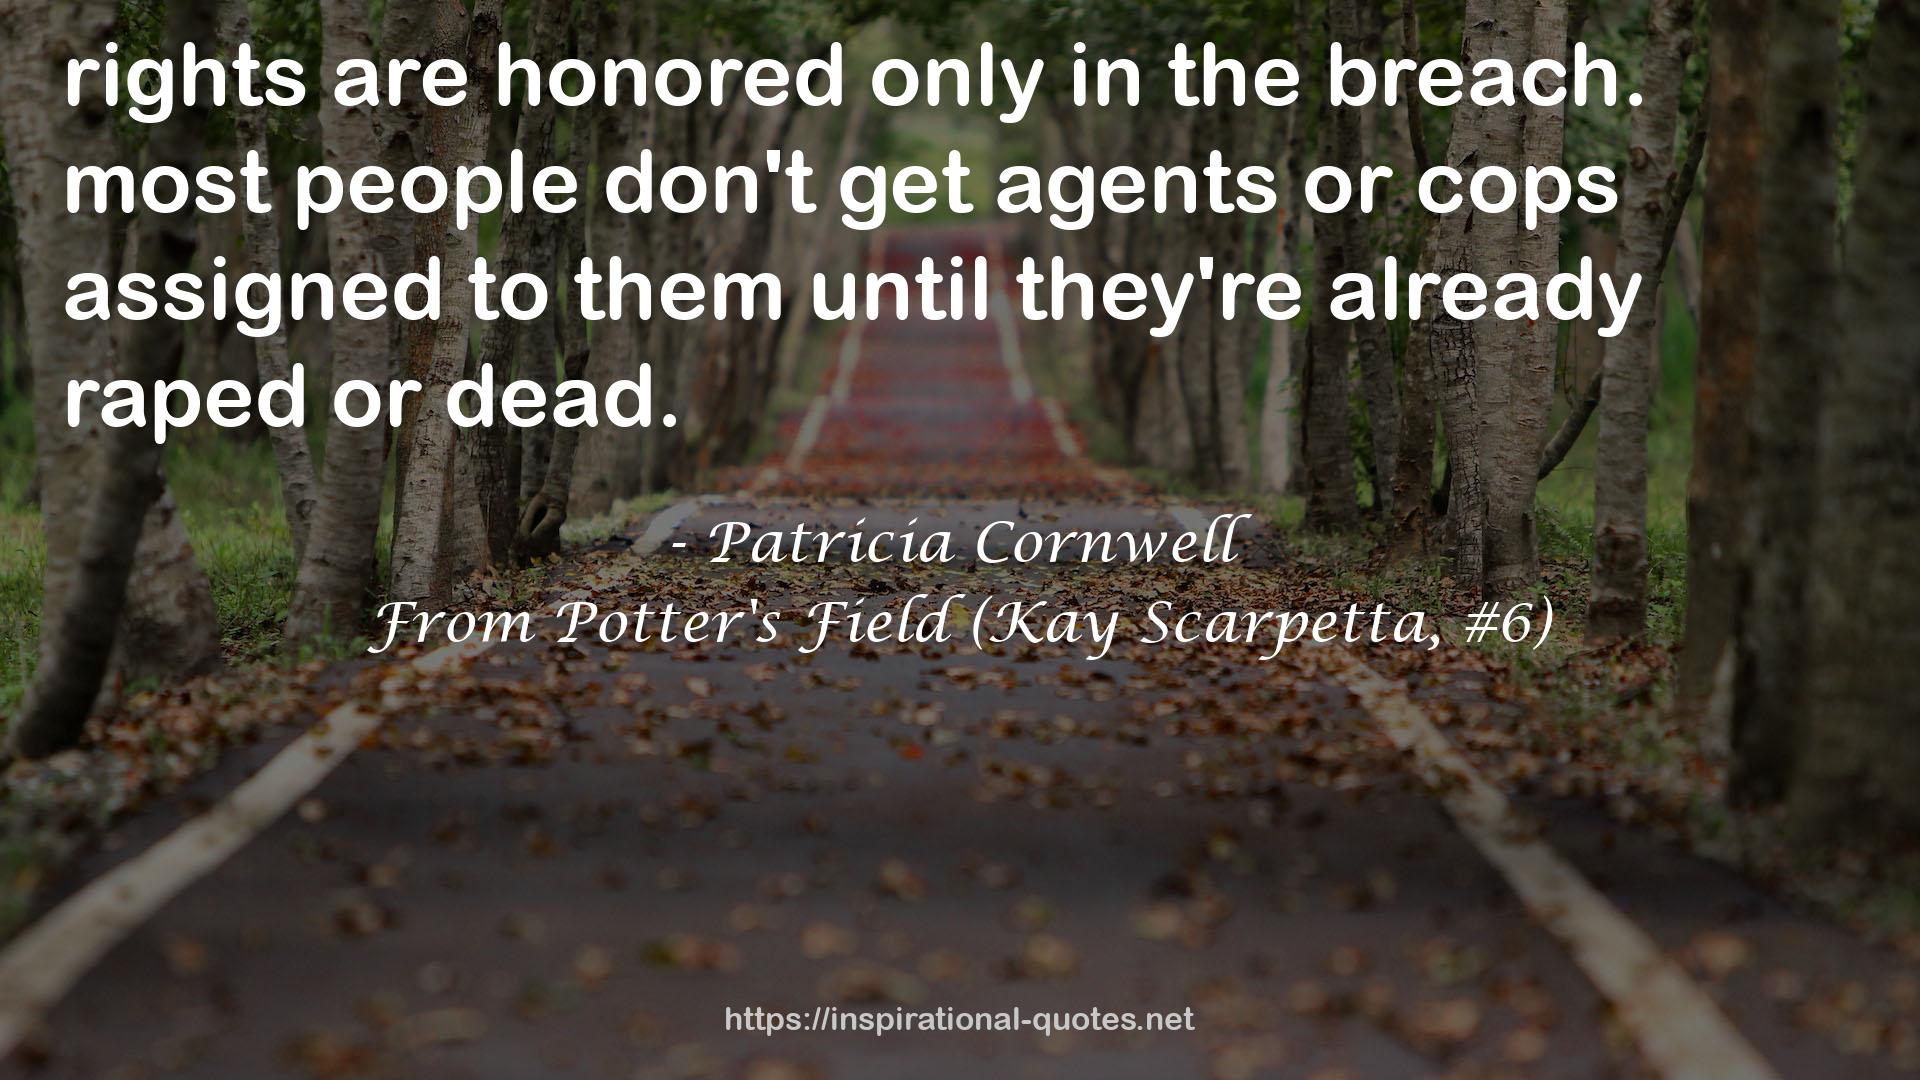 From Potter's Field (Kay Scarpetta, #6) QUOTES